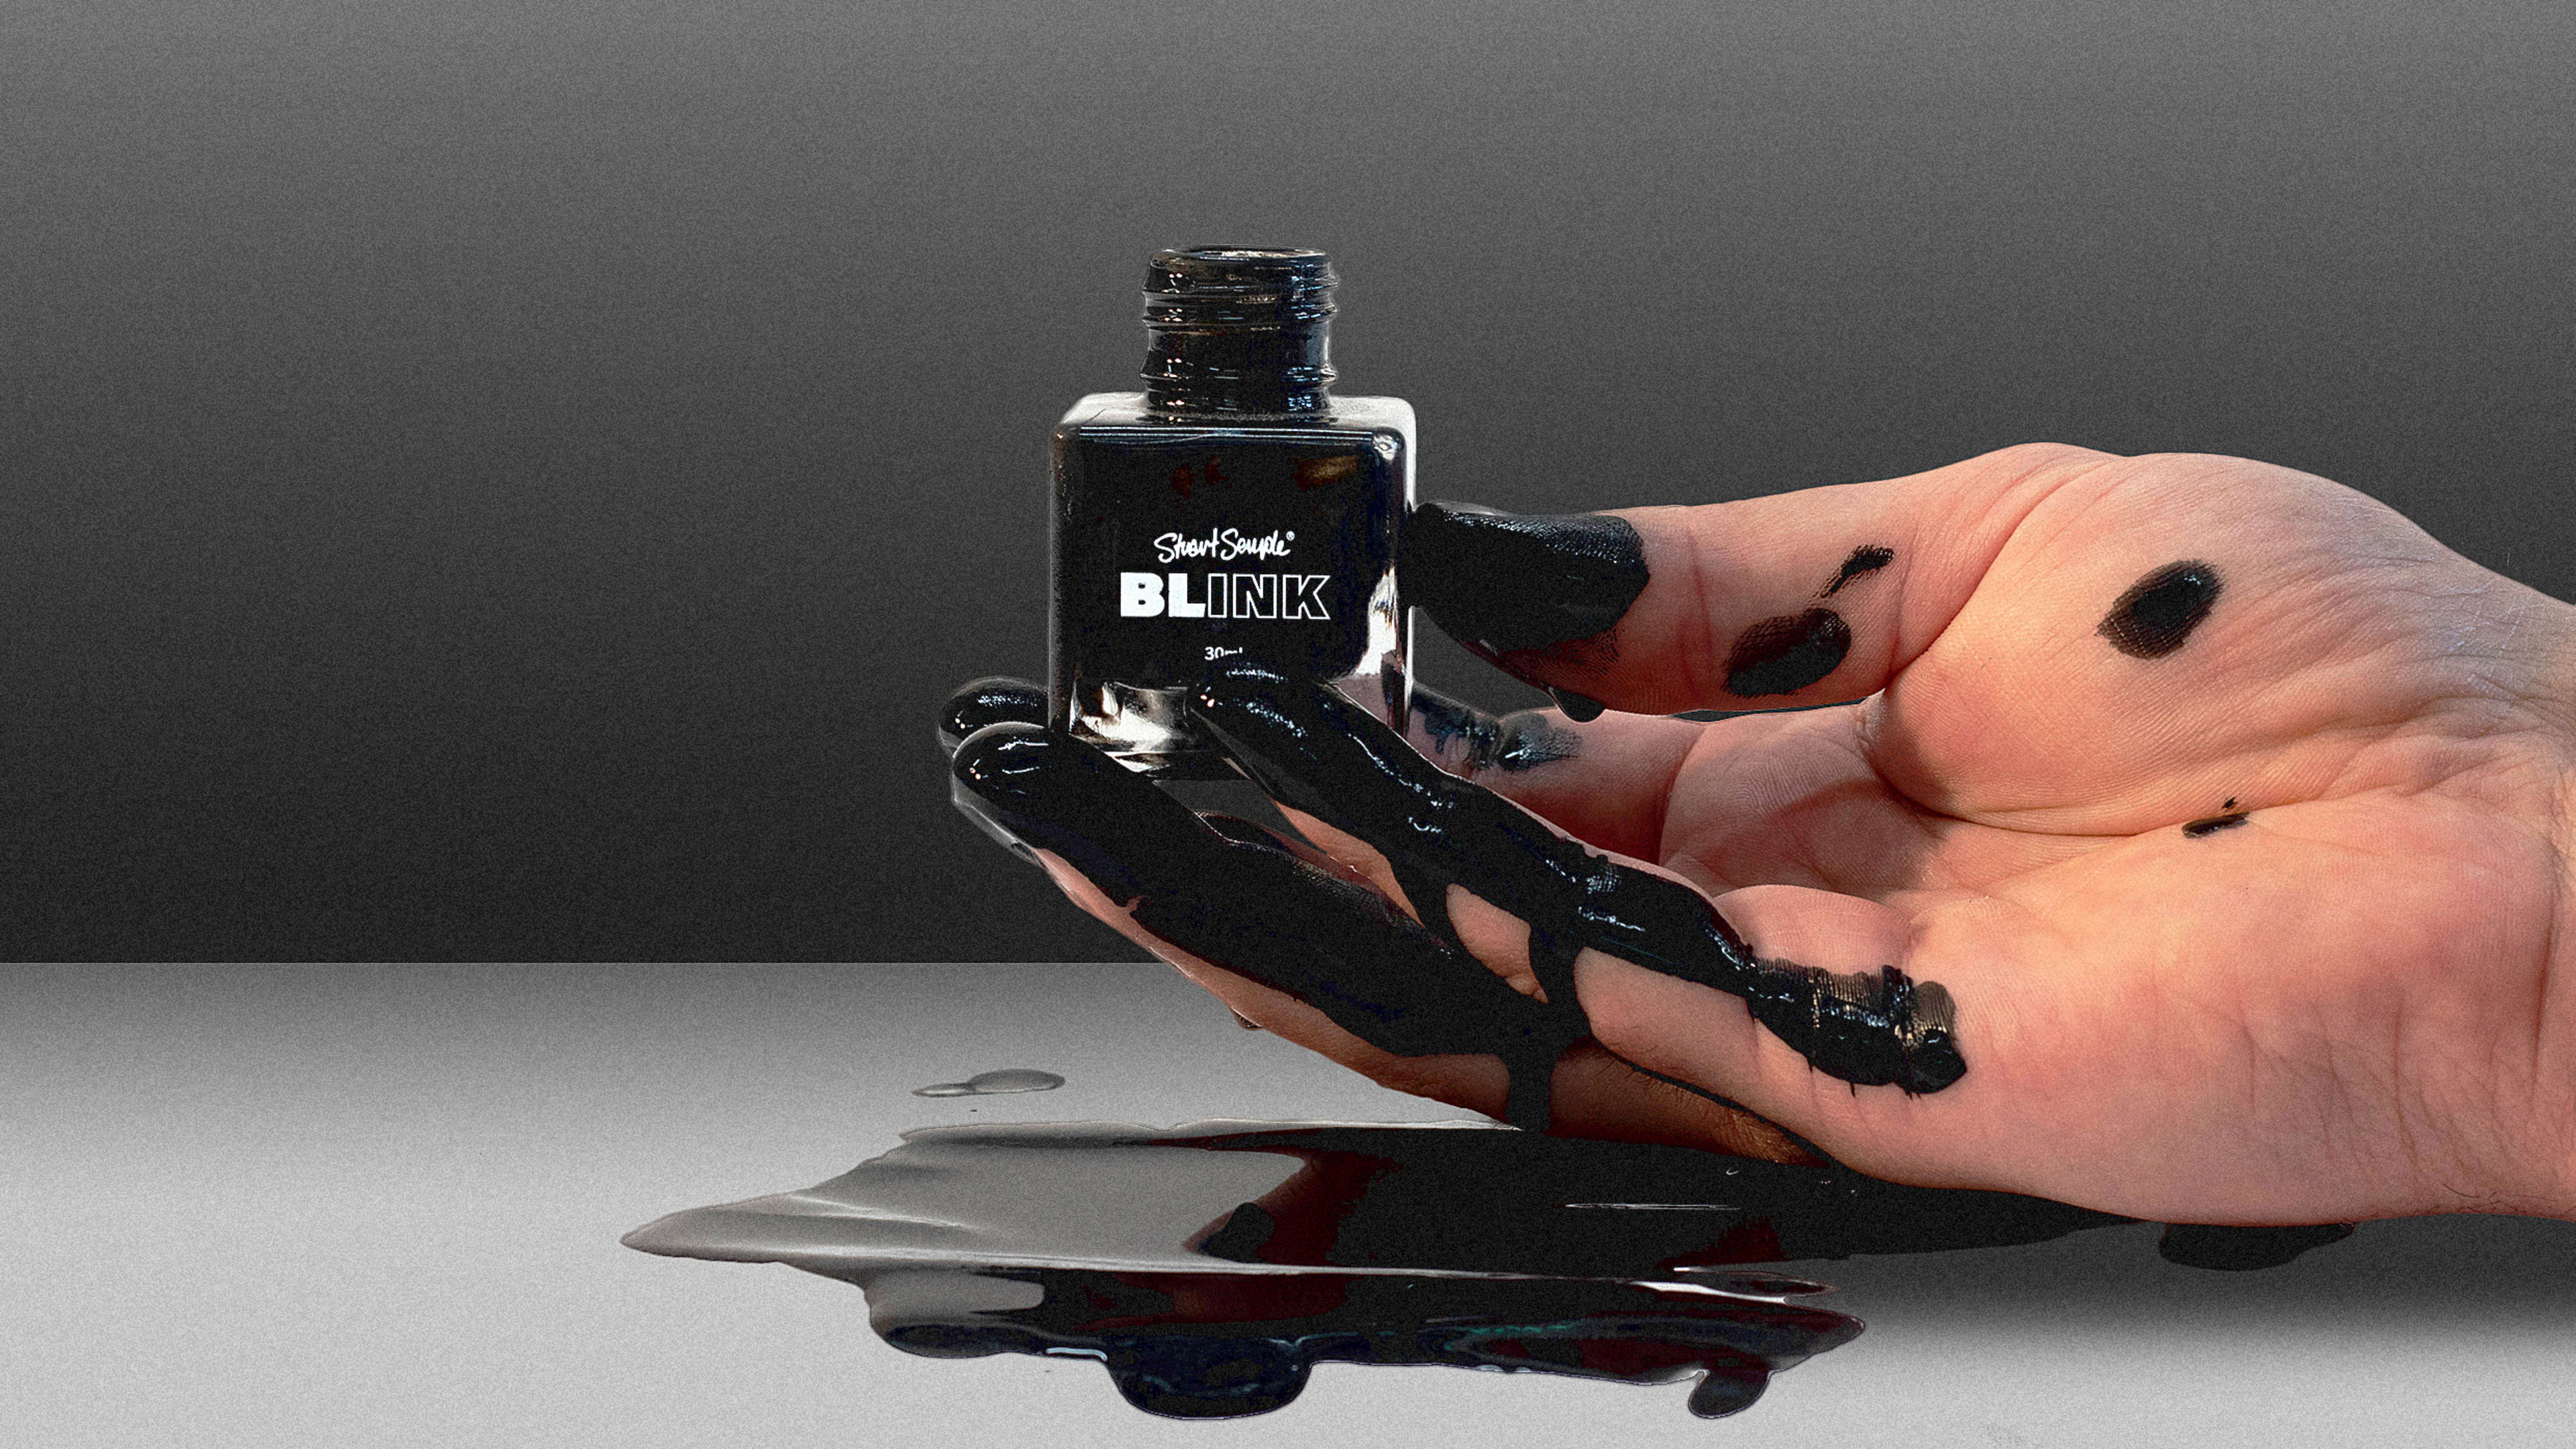 This is the world’s blackest black ink. It’s like staring into infinity